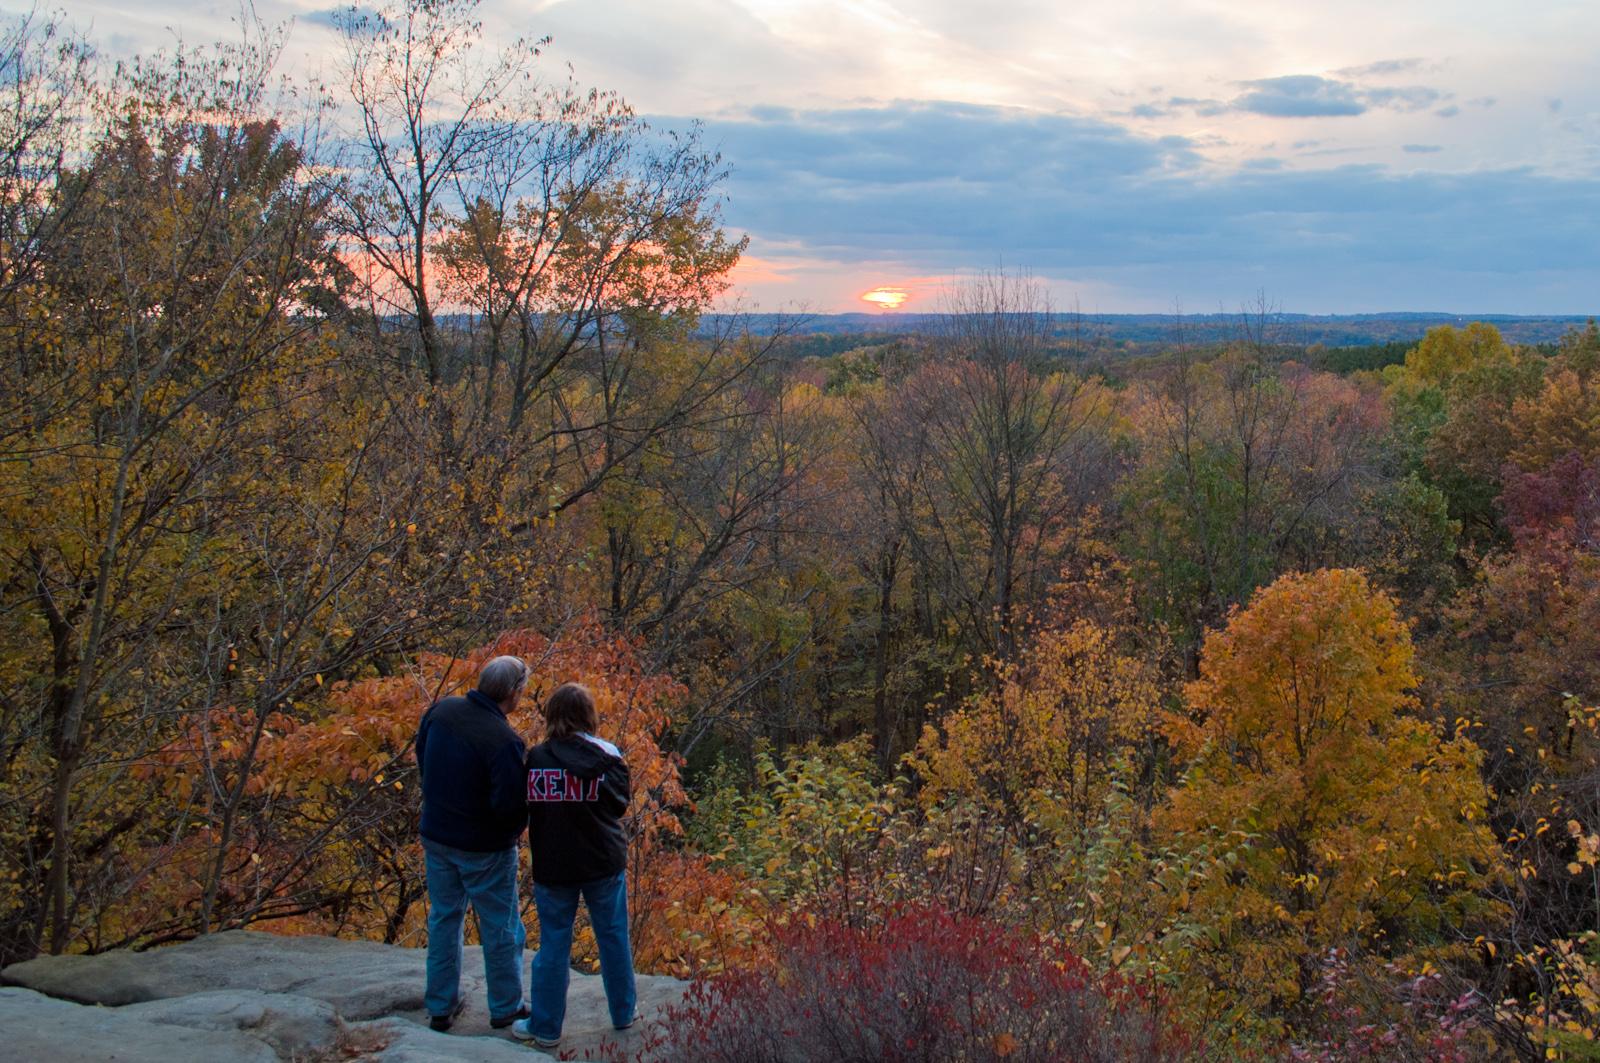 The Ledges Overlook in Fall